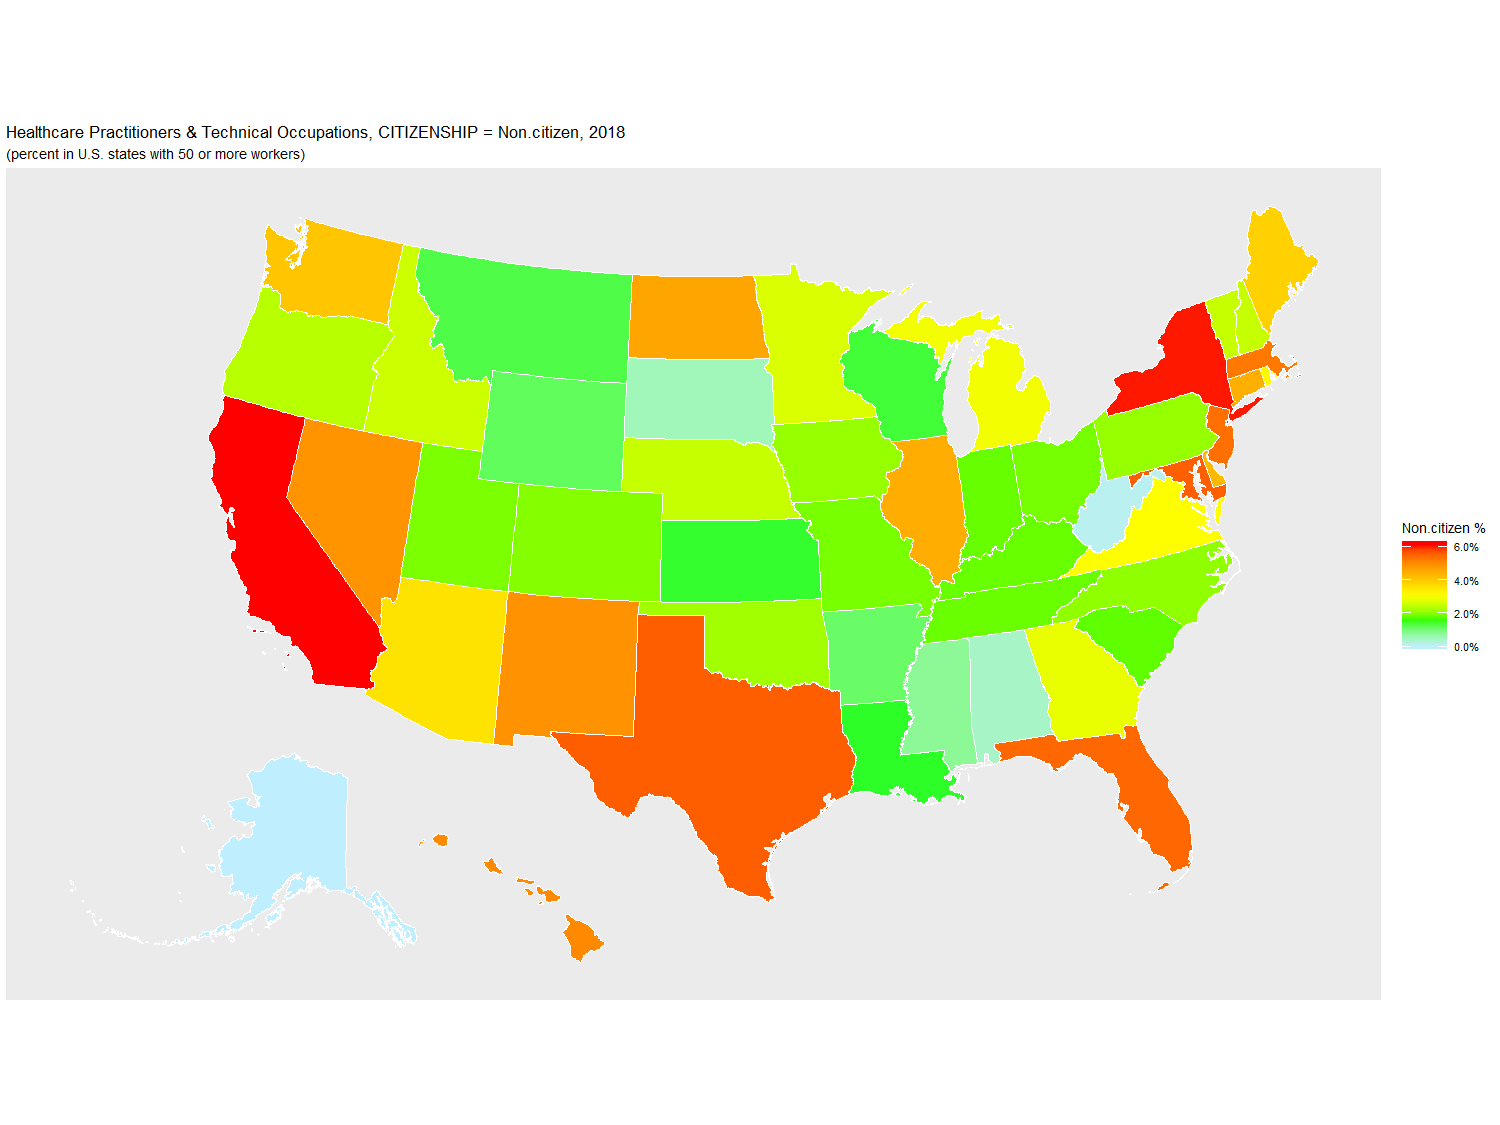 Non-citizen Percentage of Healthcare Practitioners & Technical Occupations by U.S. State, 2018